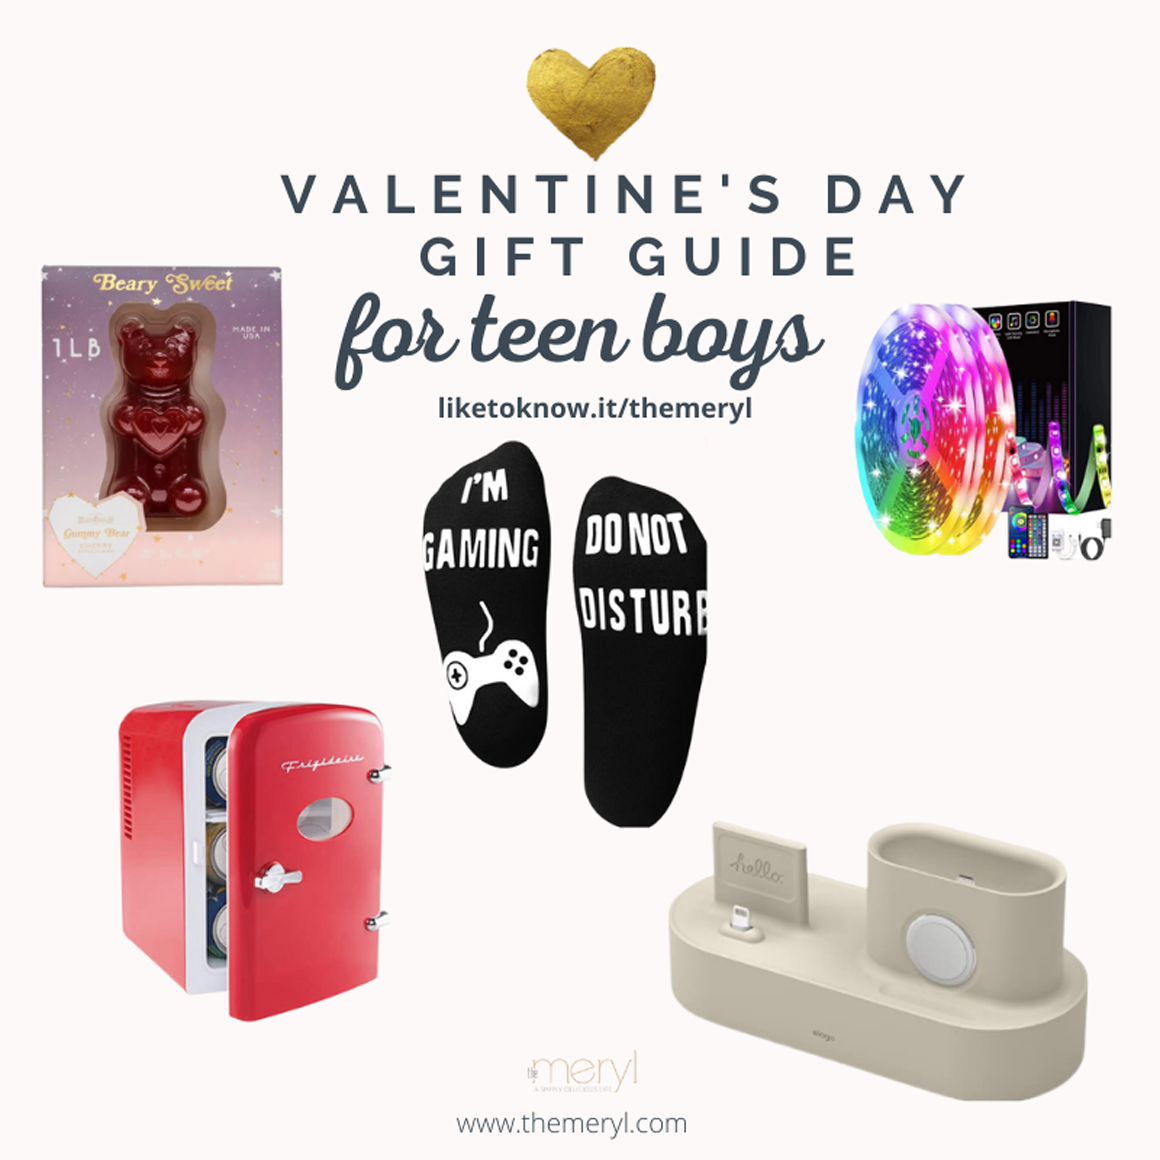 Valentine’s Day Gift Guides 2022 for Teen Boys